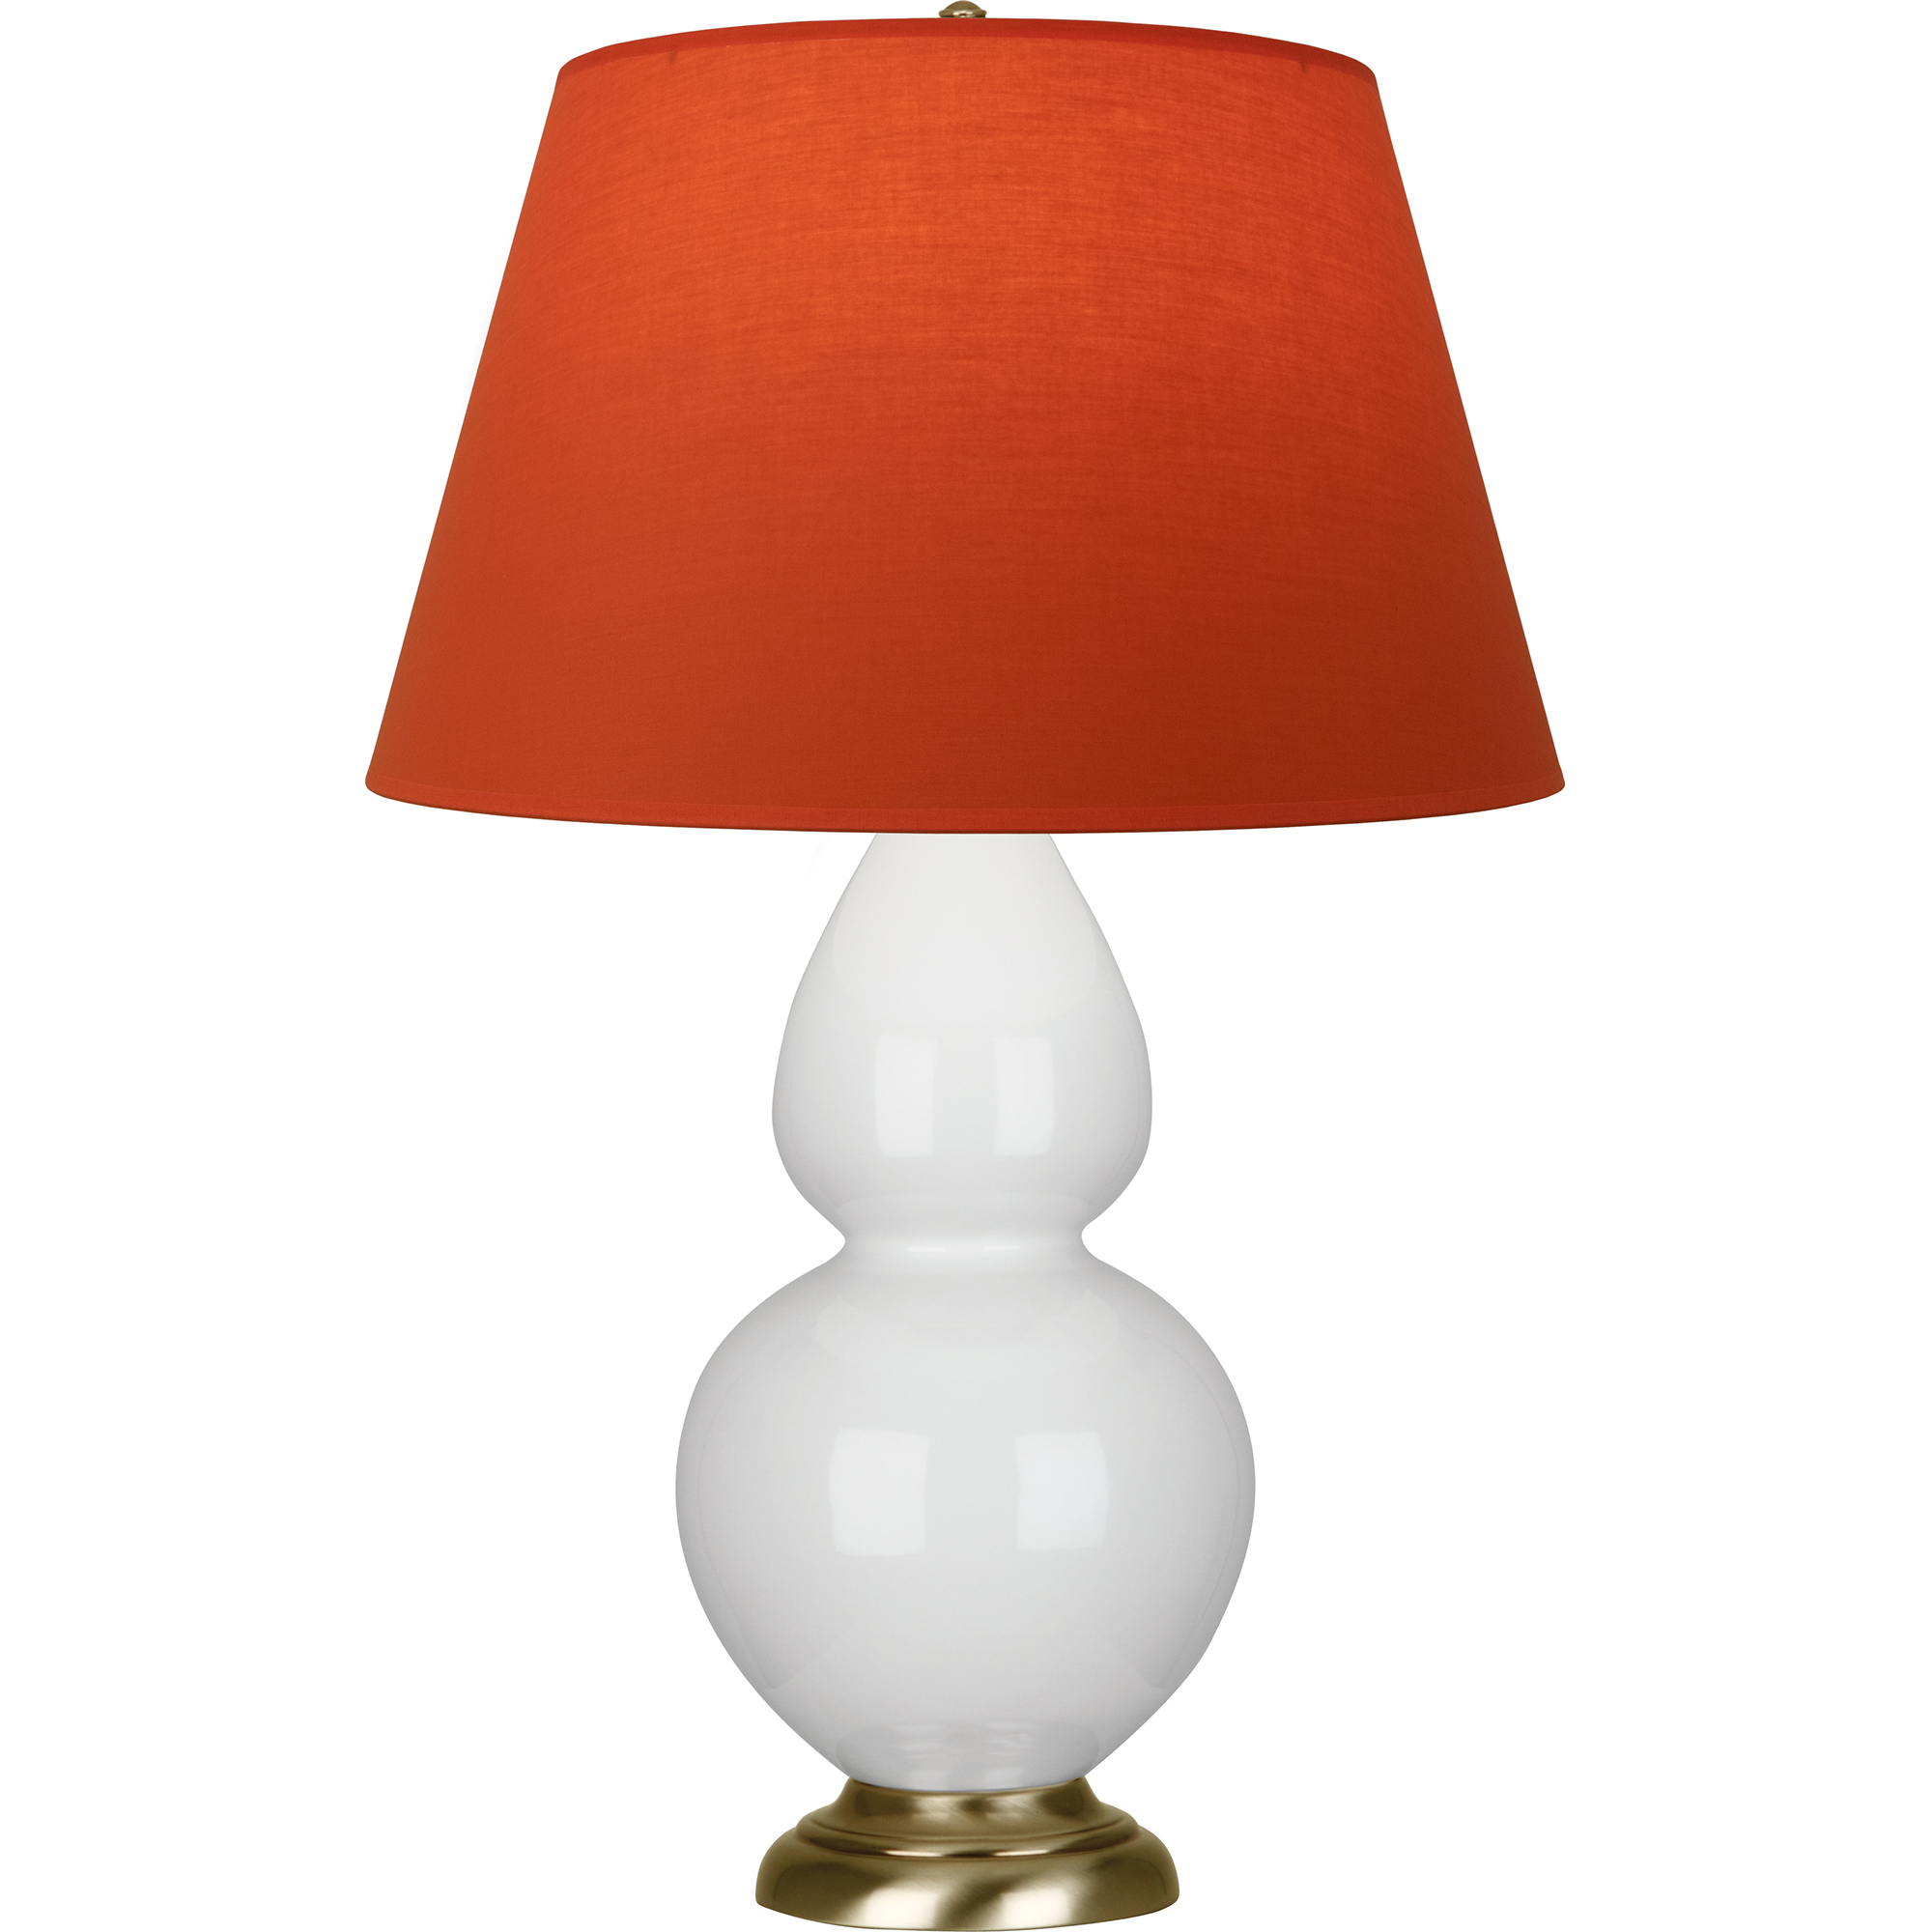 Double Gourd Table Lamp Style #1660T